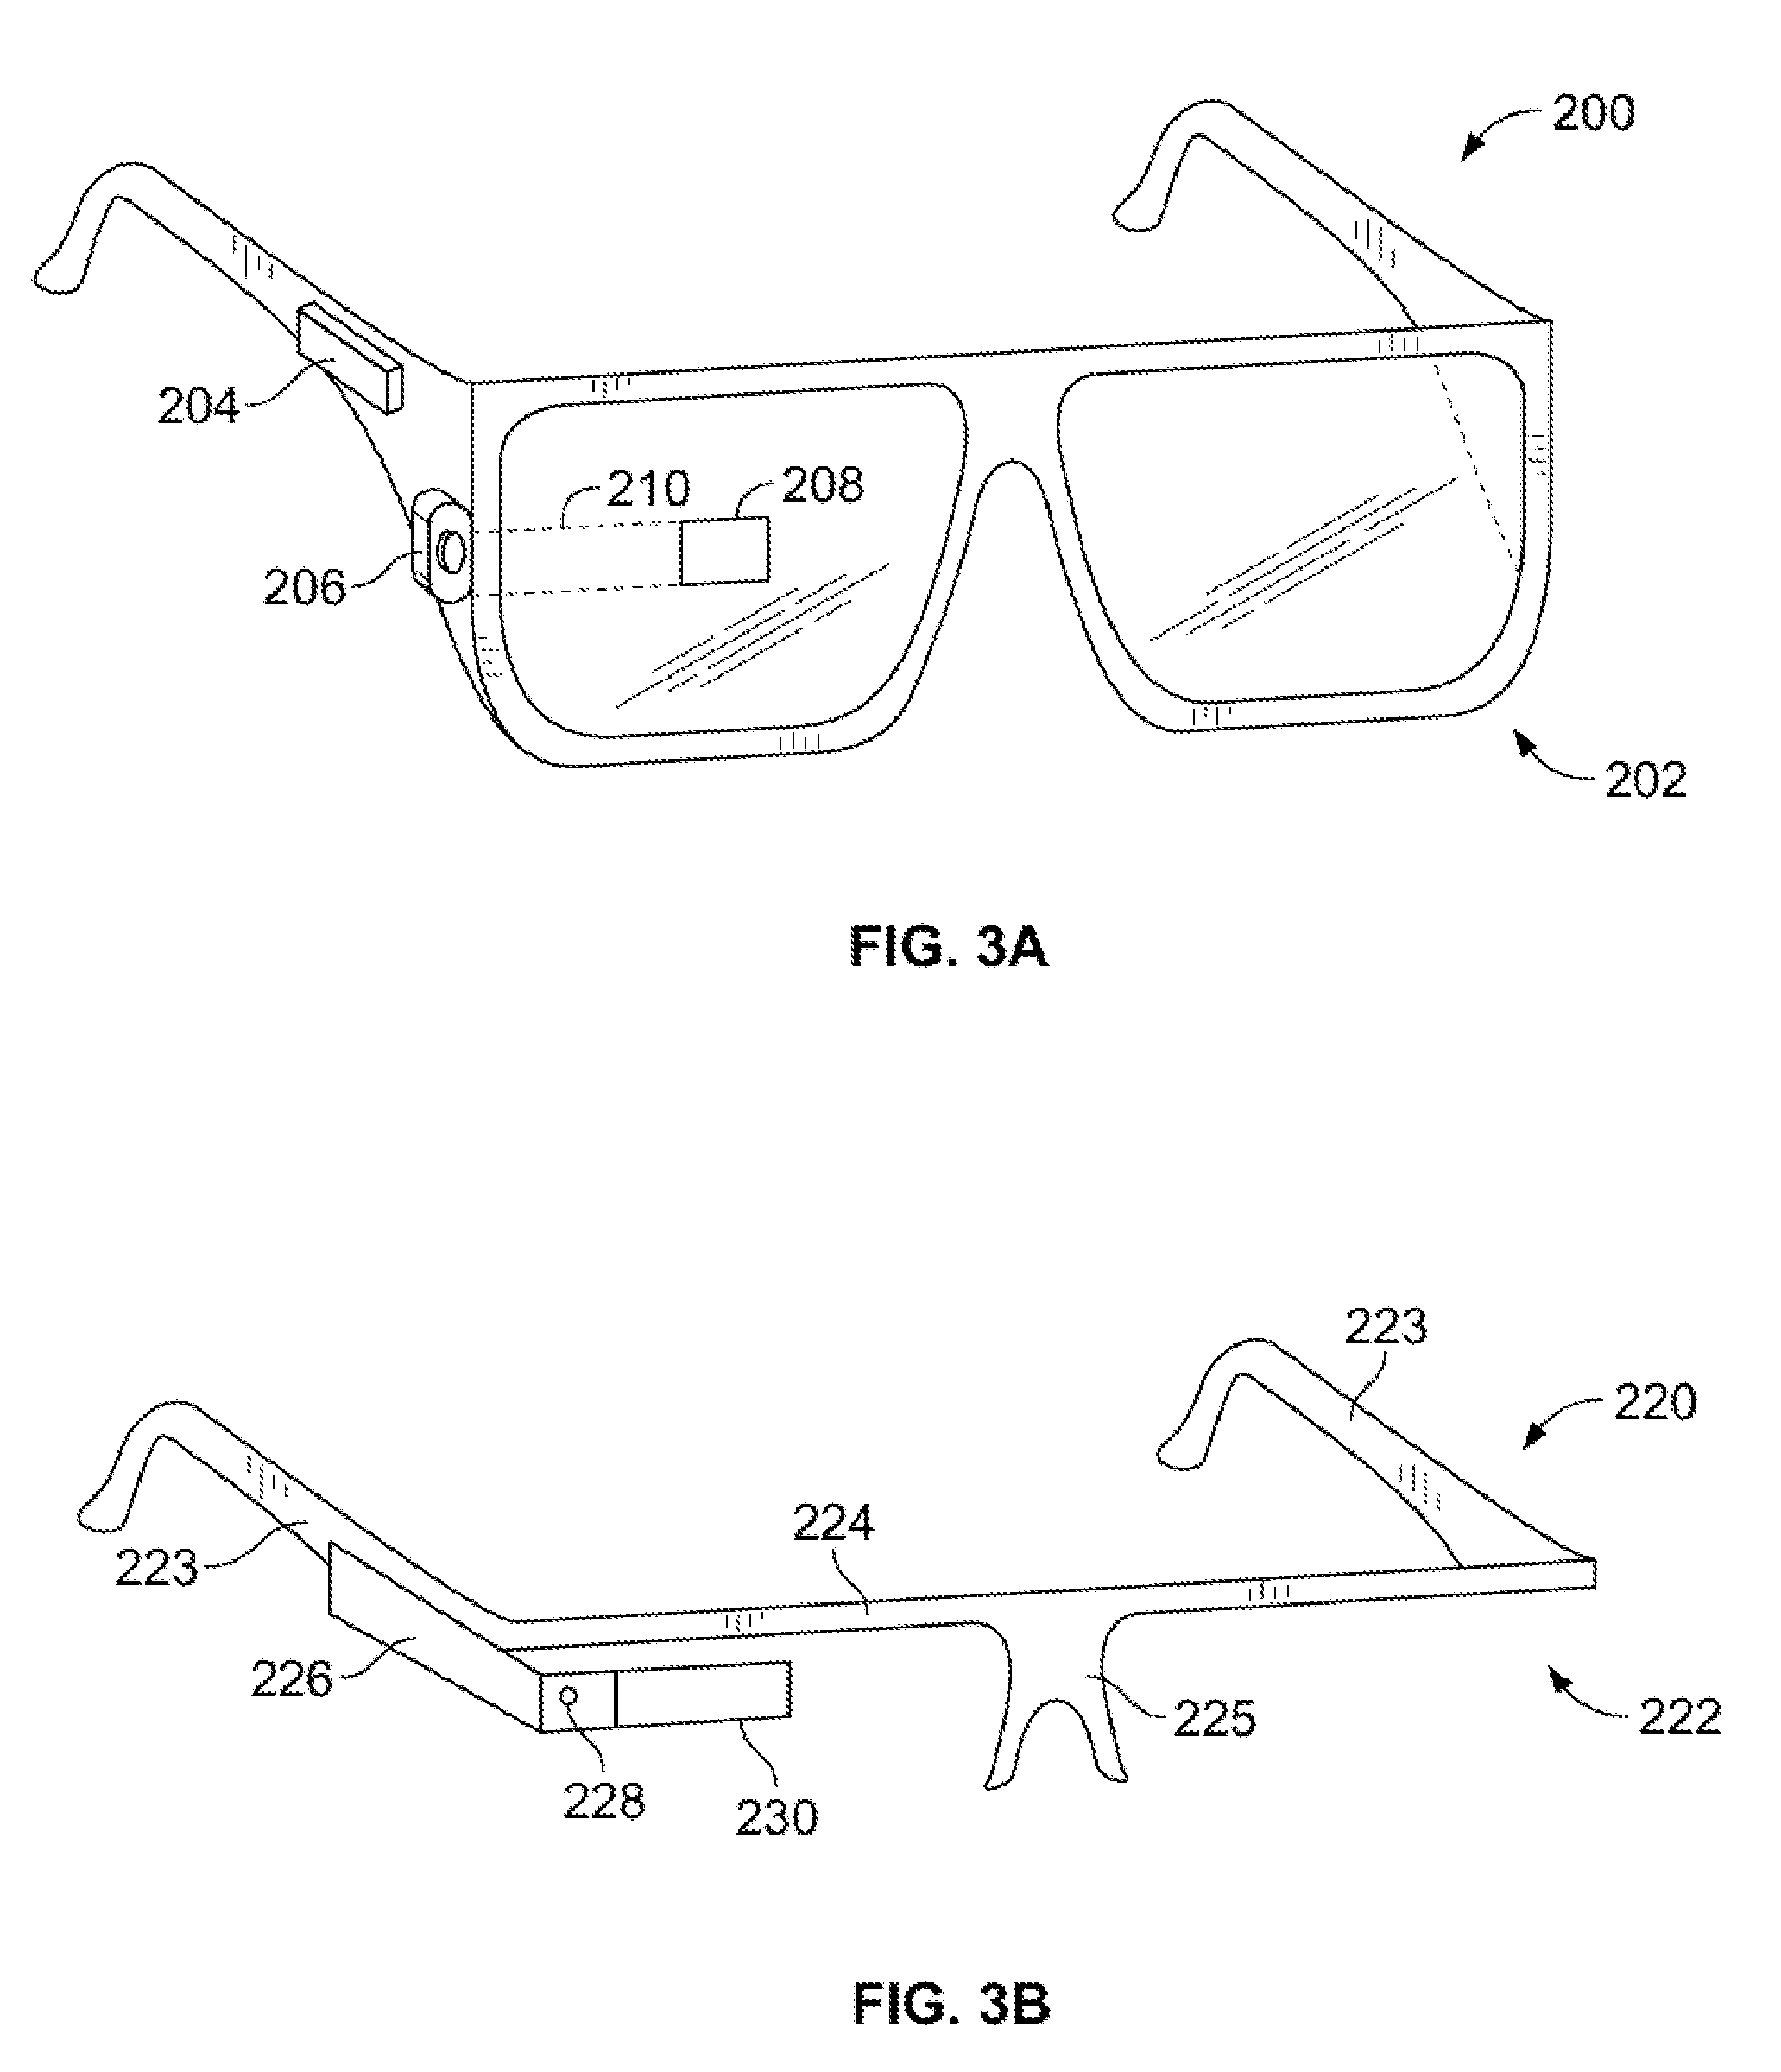 Eyeglass frame with input and output functionality